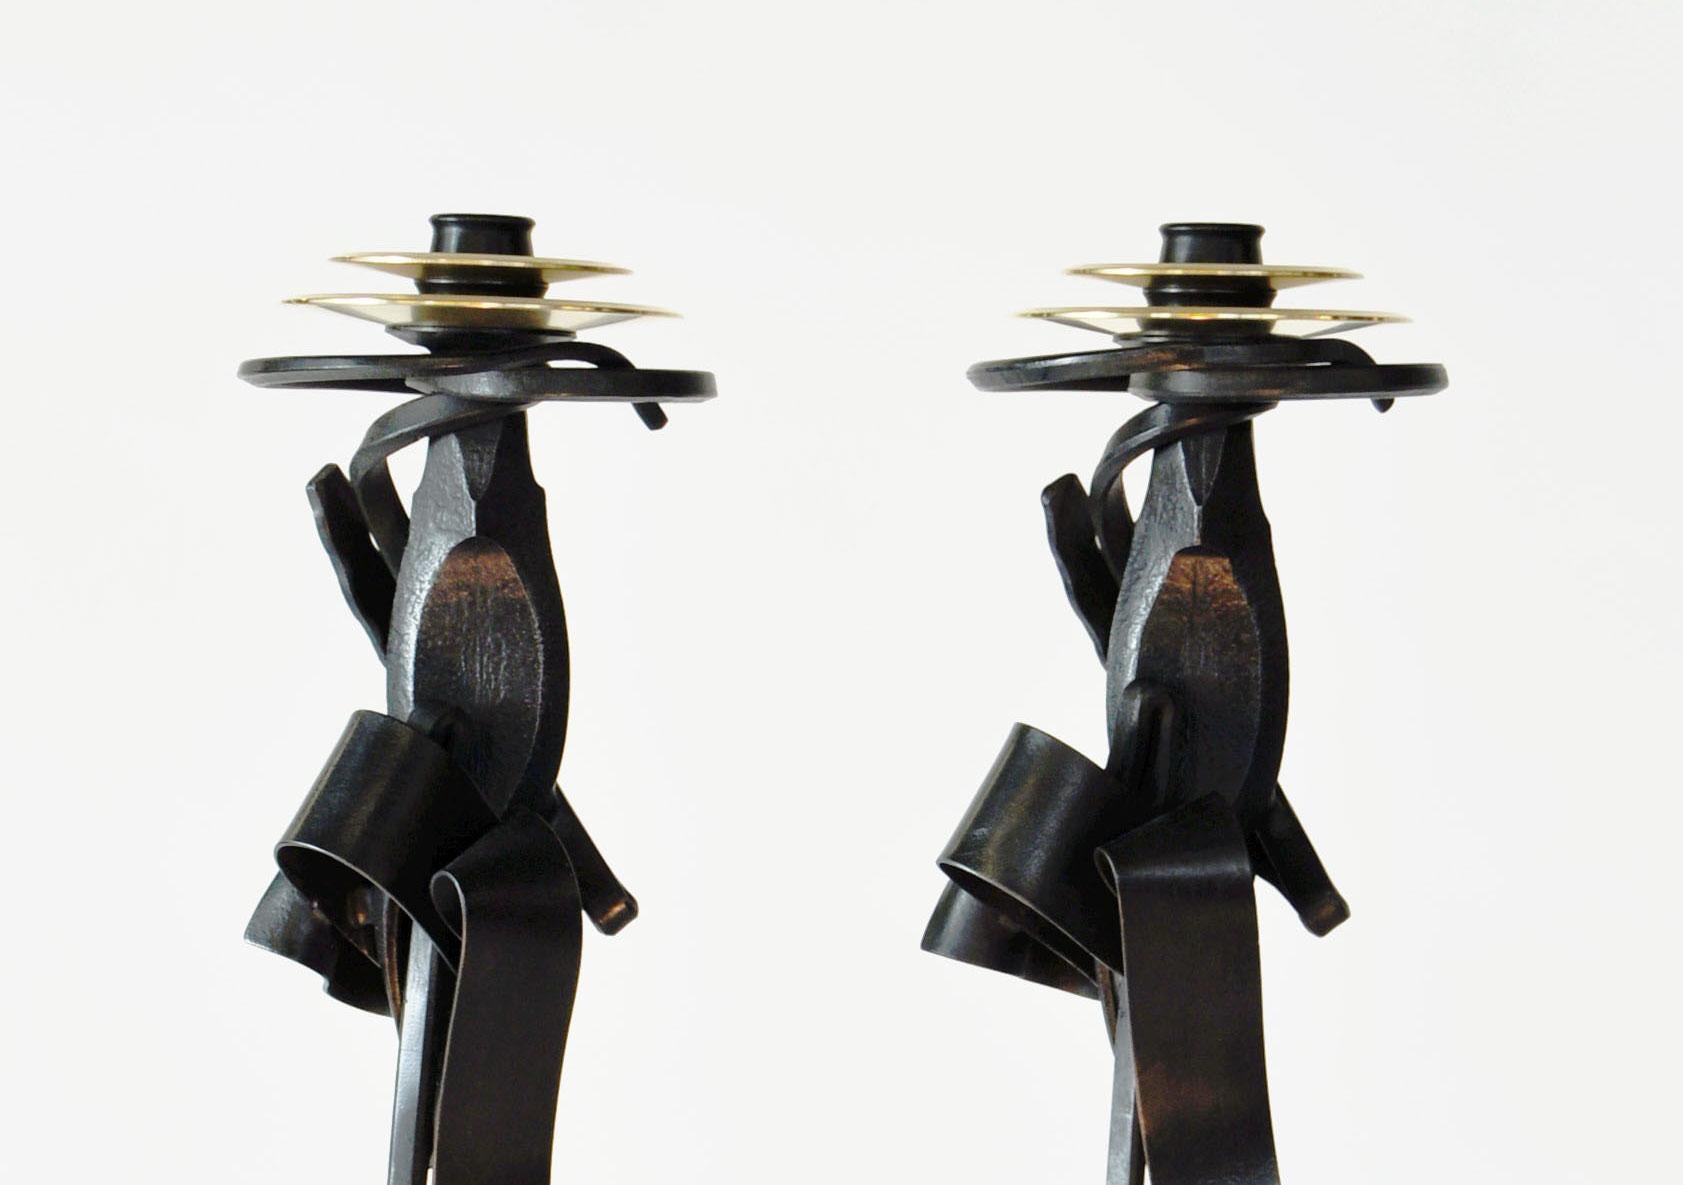 Scepter candleholder (pair) are forged and fabricated steel candleholders by metal artist Albert Paley.

Albert Paley (born 1944) is an American modernist metal sculptor. Initially starting out as a jeweler, Paley has become one of the most